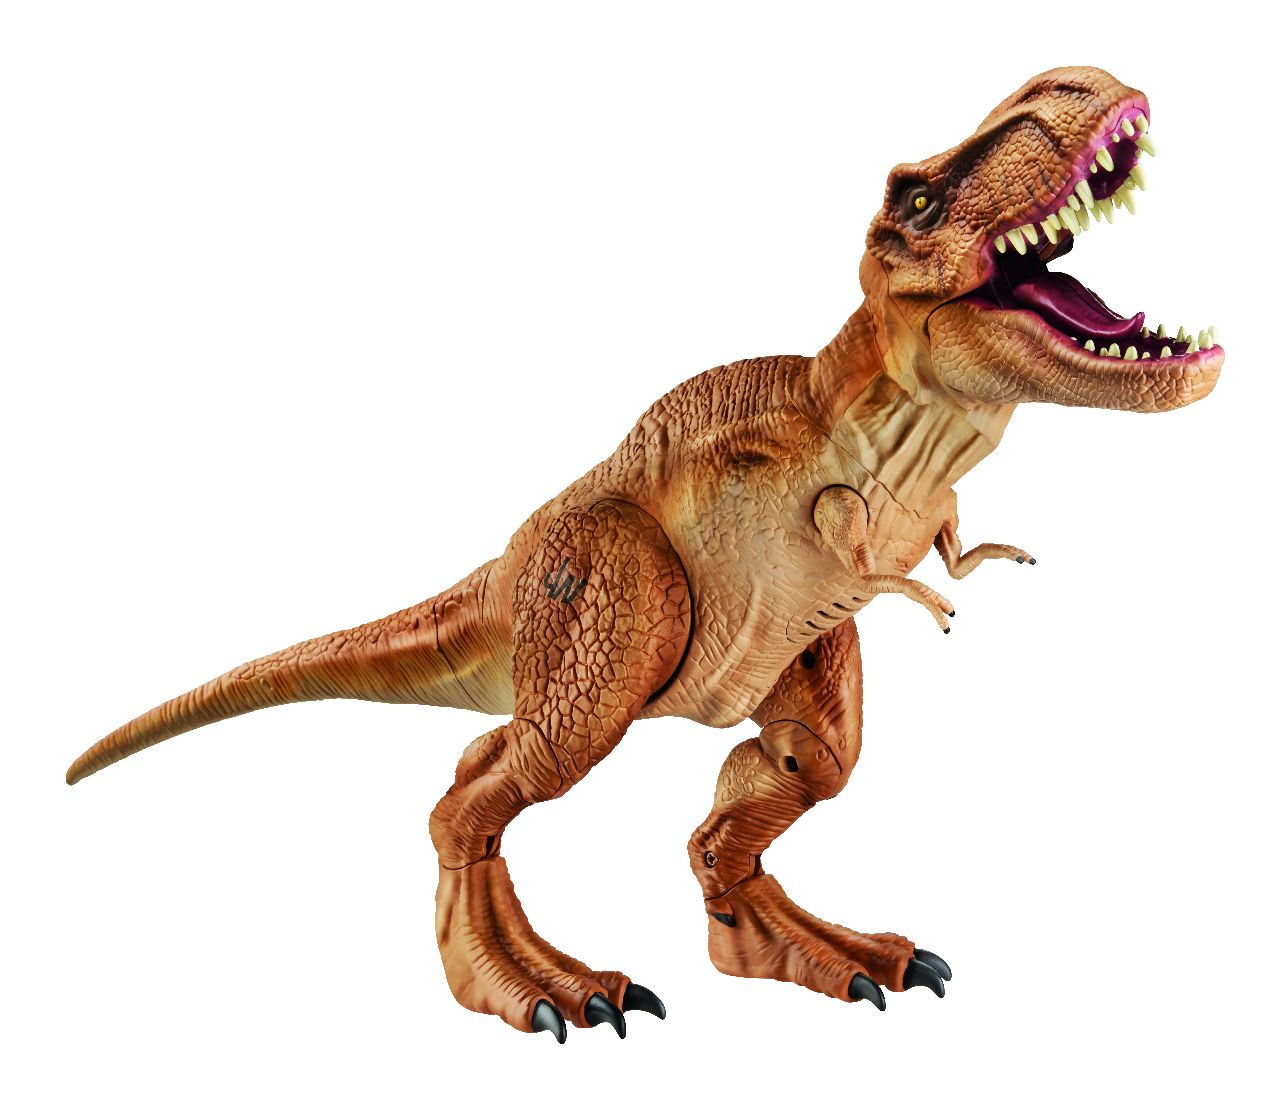 New Jurassic World Toys: See The Indominus Rex And More